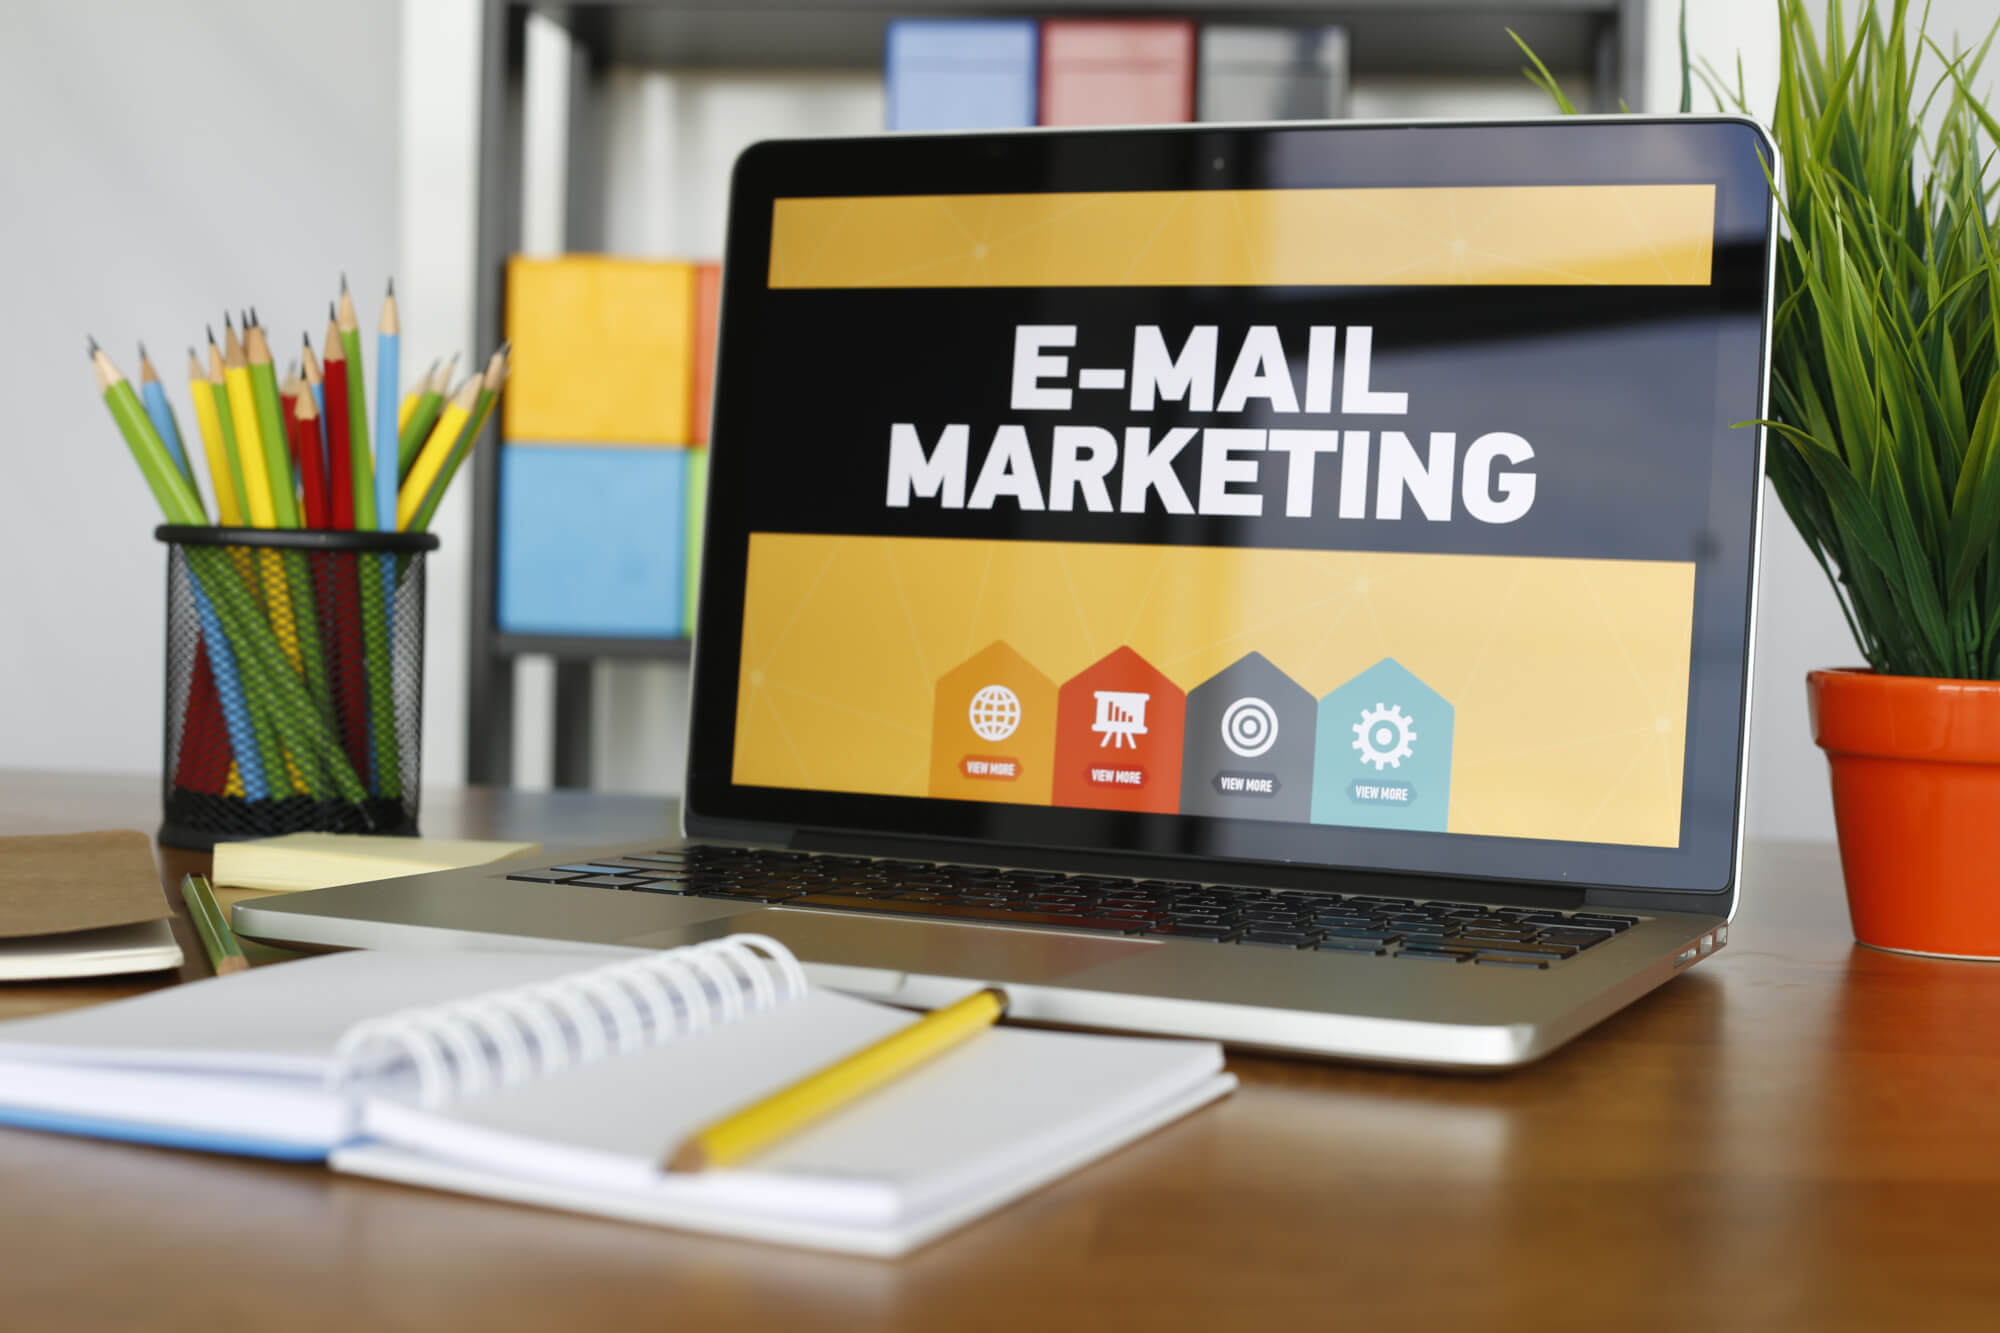 Marketing To Your Customers Complete Email: A Guide